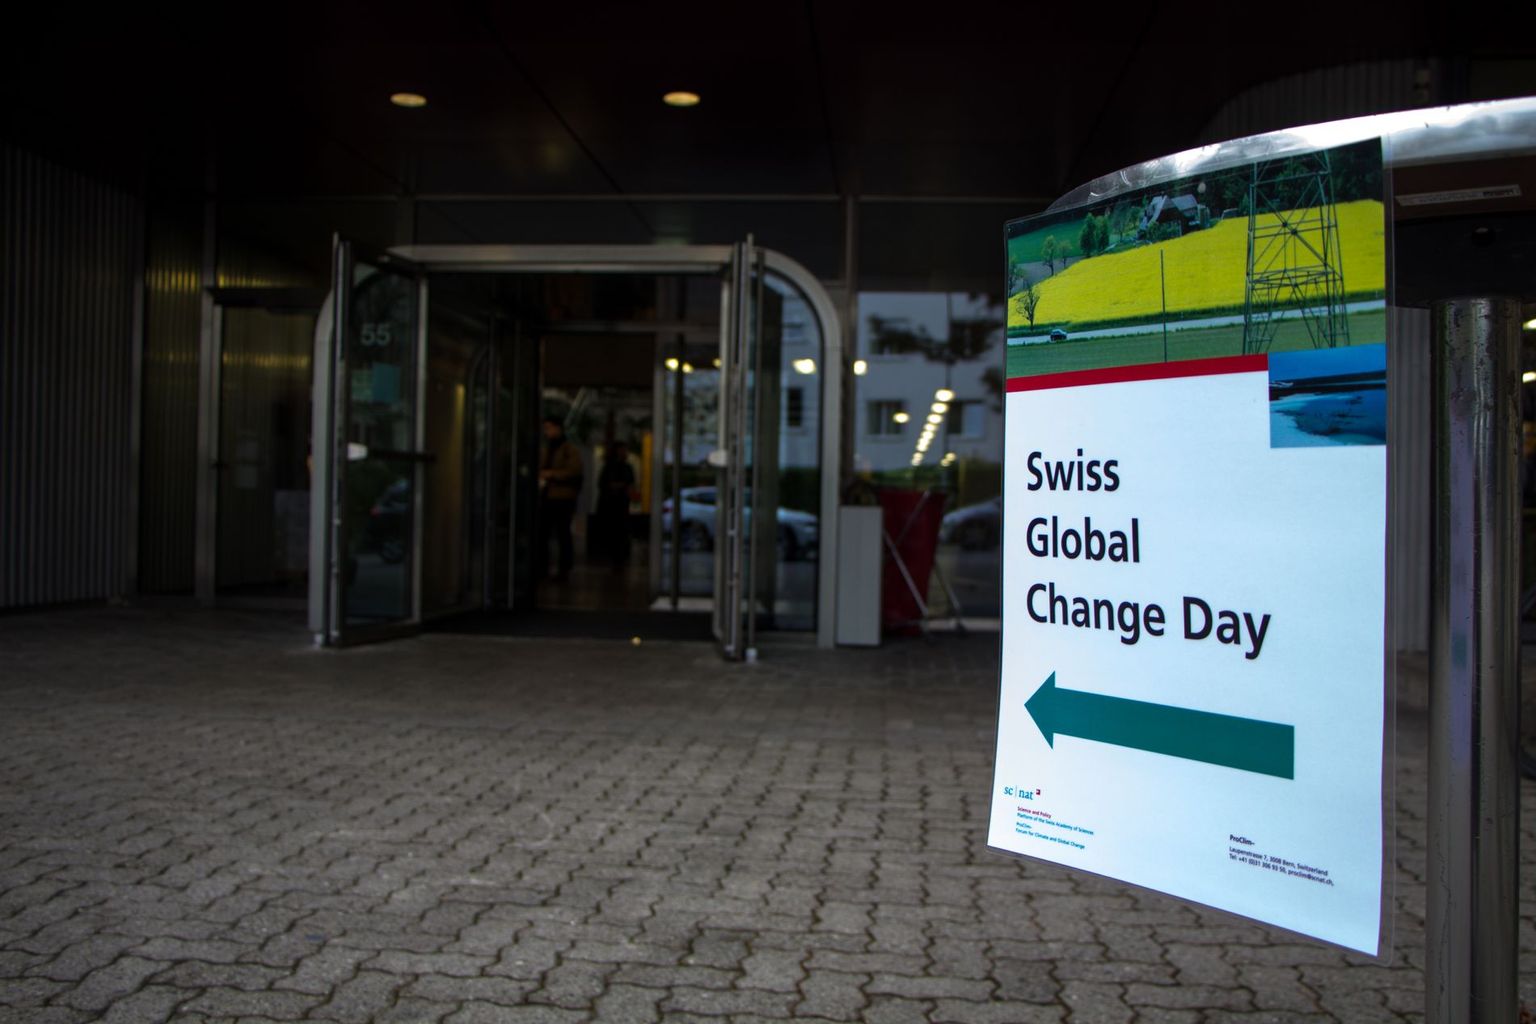 Welcome to the 18th Swiss Global Change Day! #SGCD17